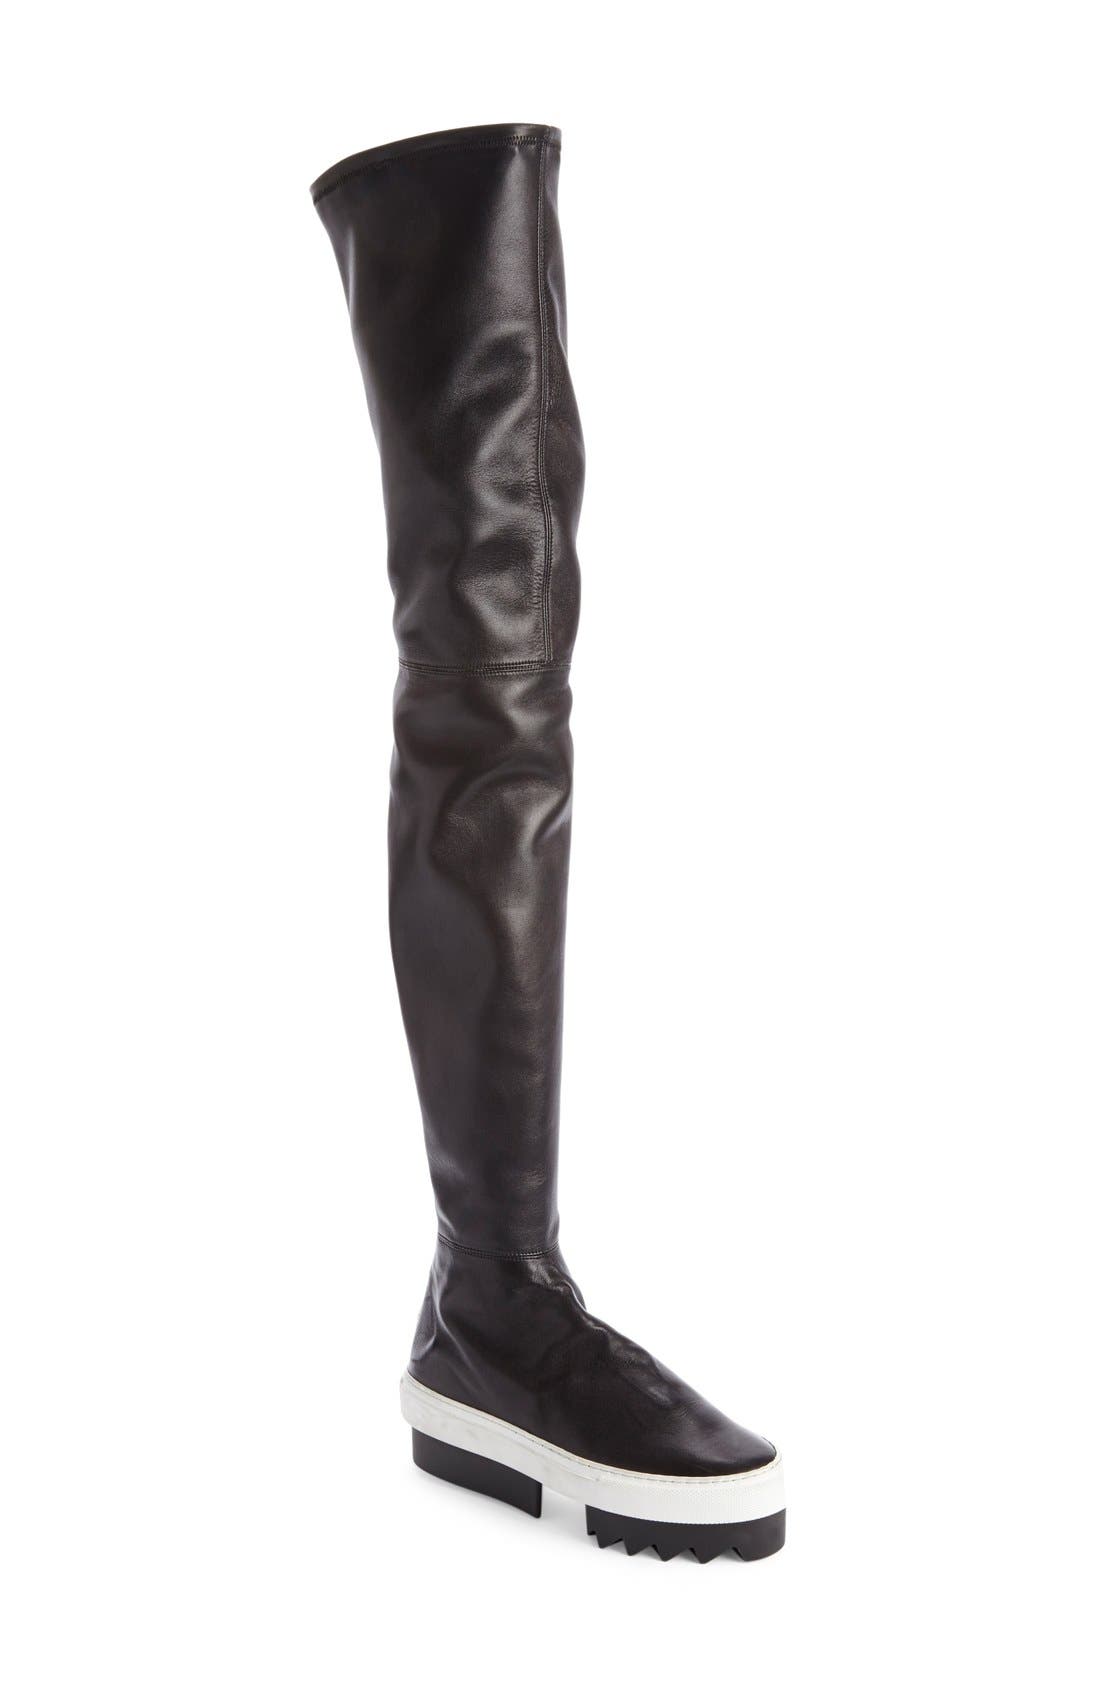 givenchy boots nordstrom